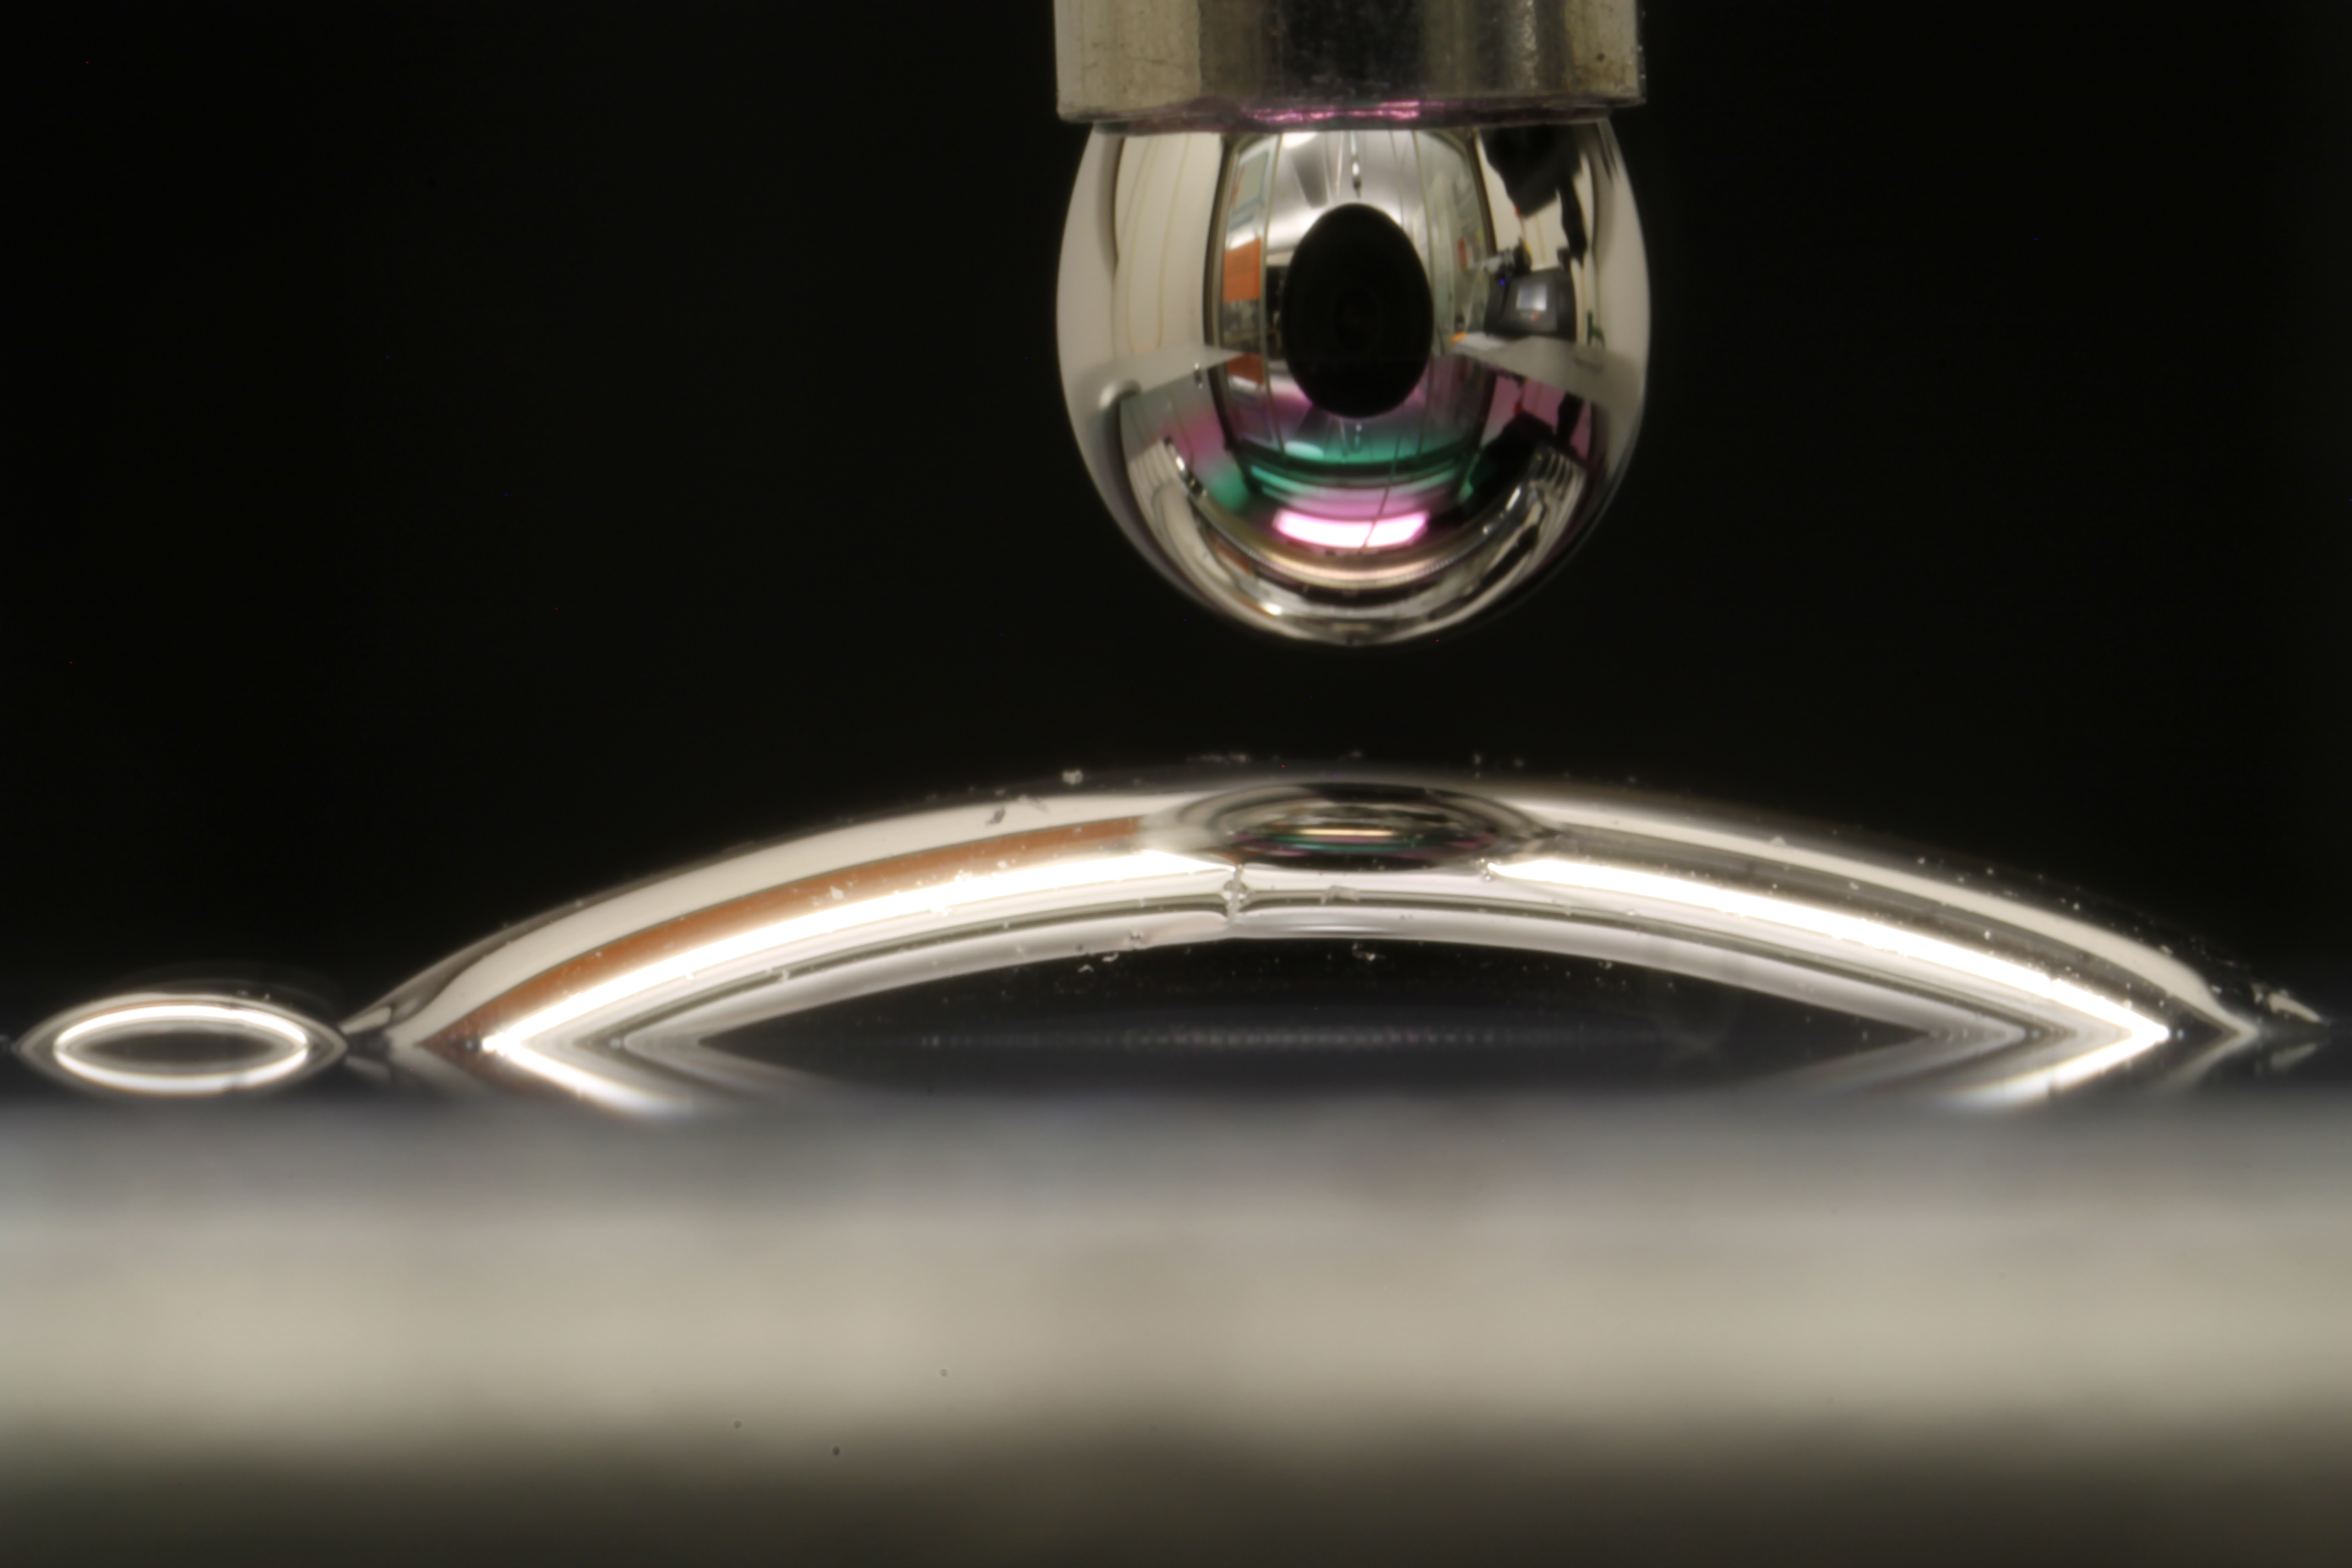 Controlling how “odd couple” surfaces and liquids interact - MIT News